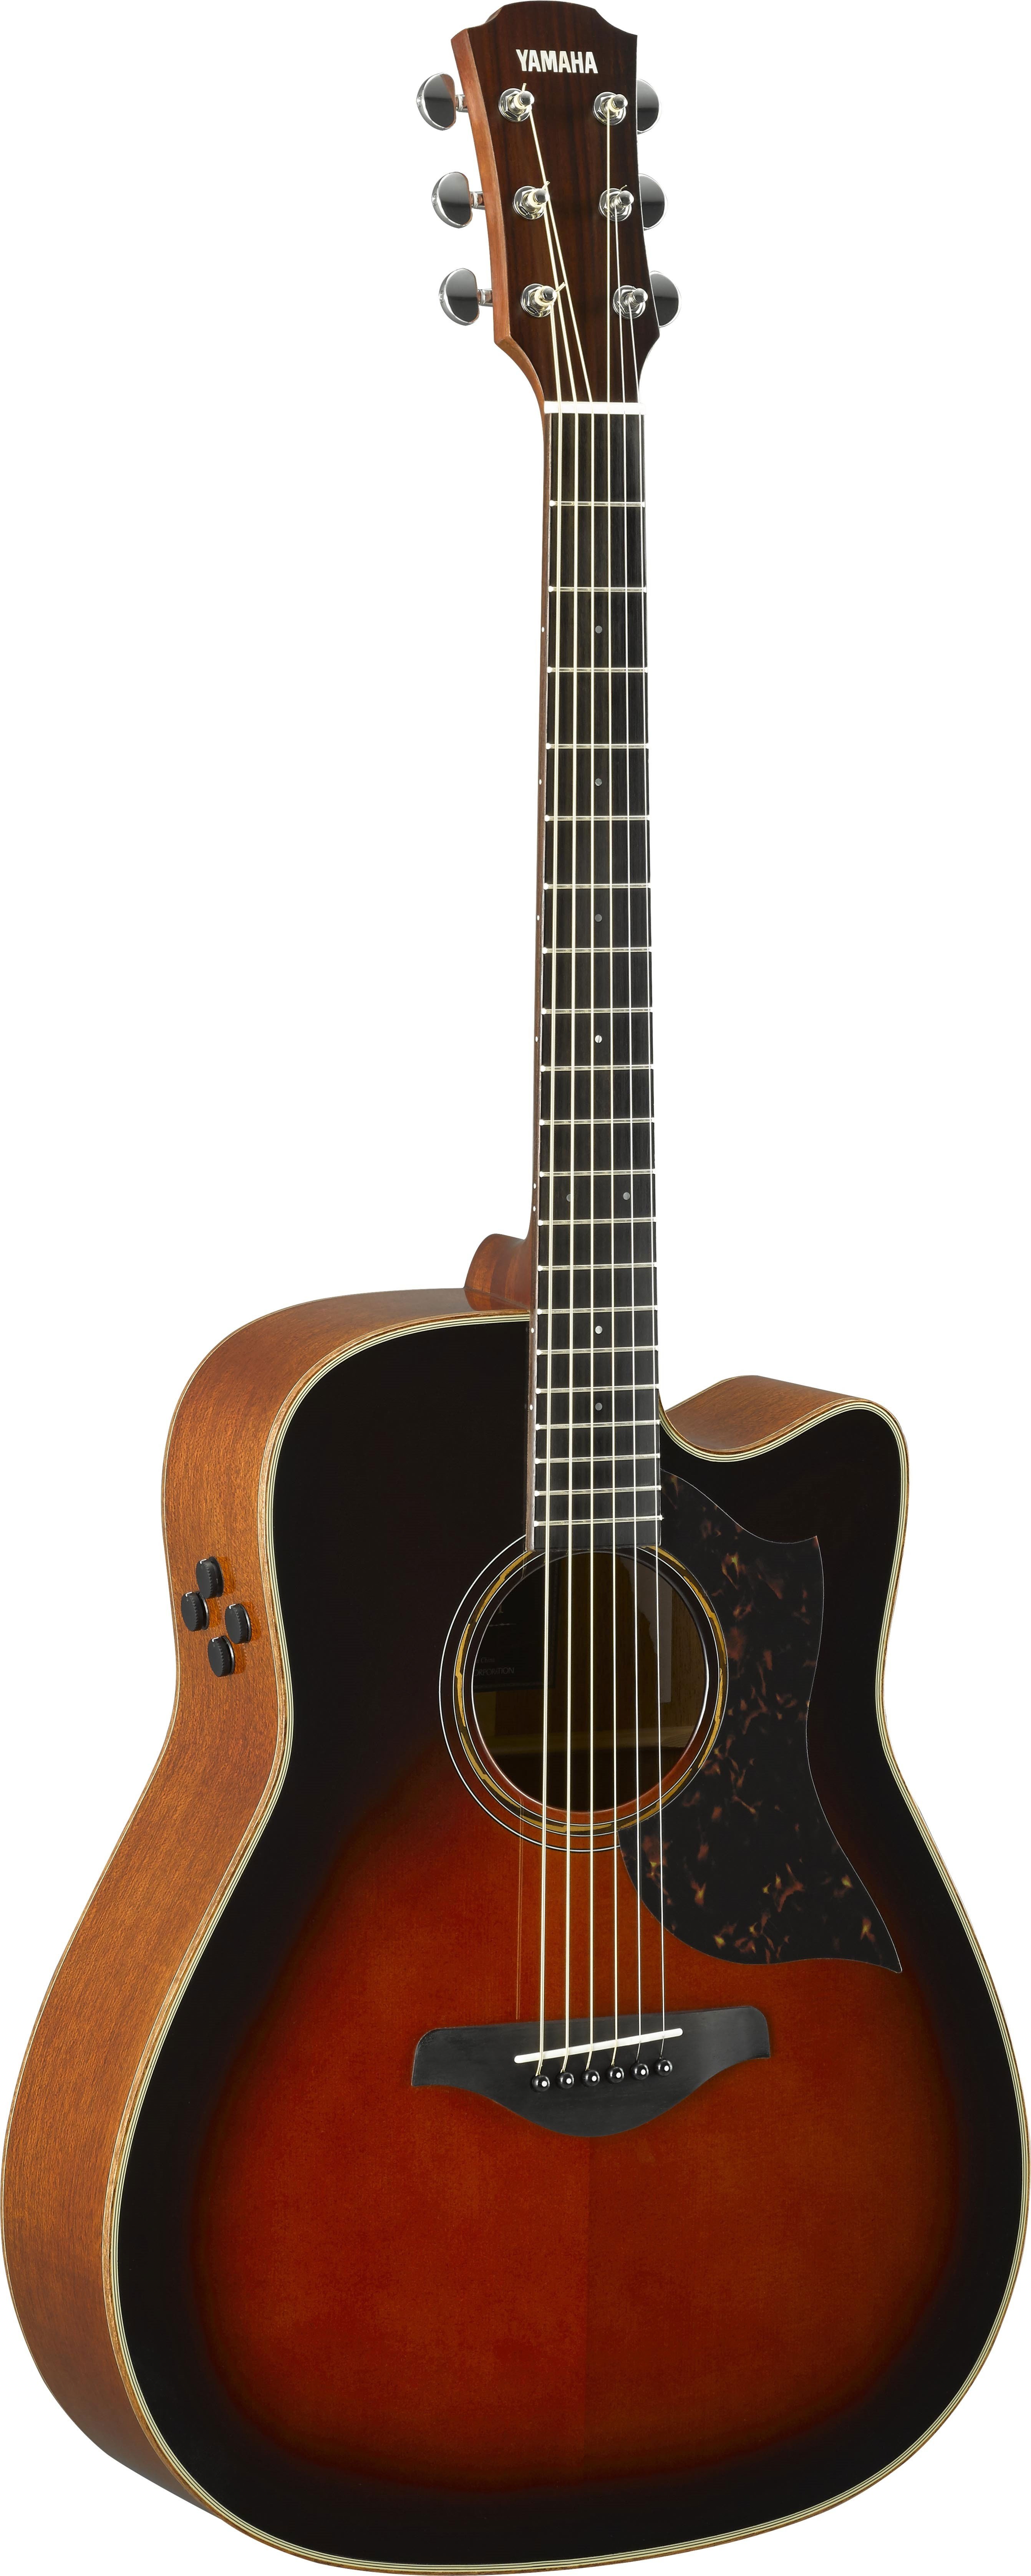 Yamaha A3M Dreadnought Cutaway - Sunburst Acoustic-Electric Guitar, Sitka Spruce Top, Solid Mahogany Back and Sides for sale